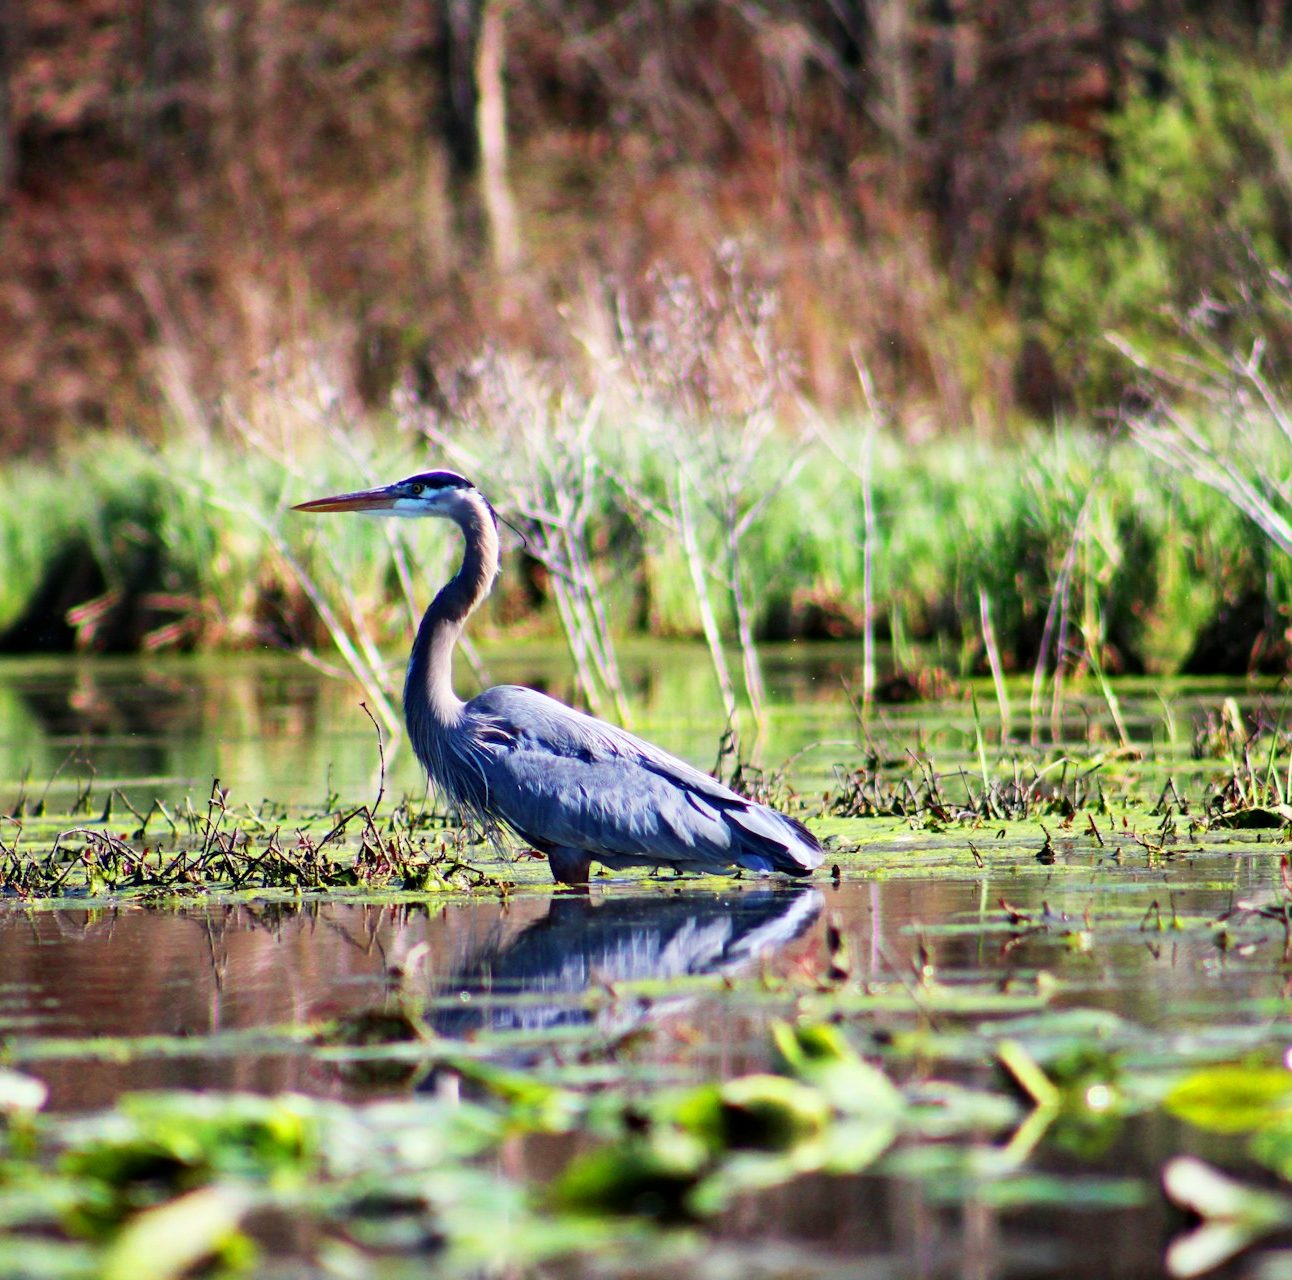 A heron stood in water with a grassy background